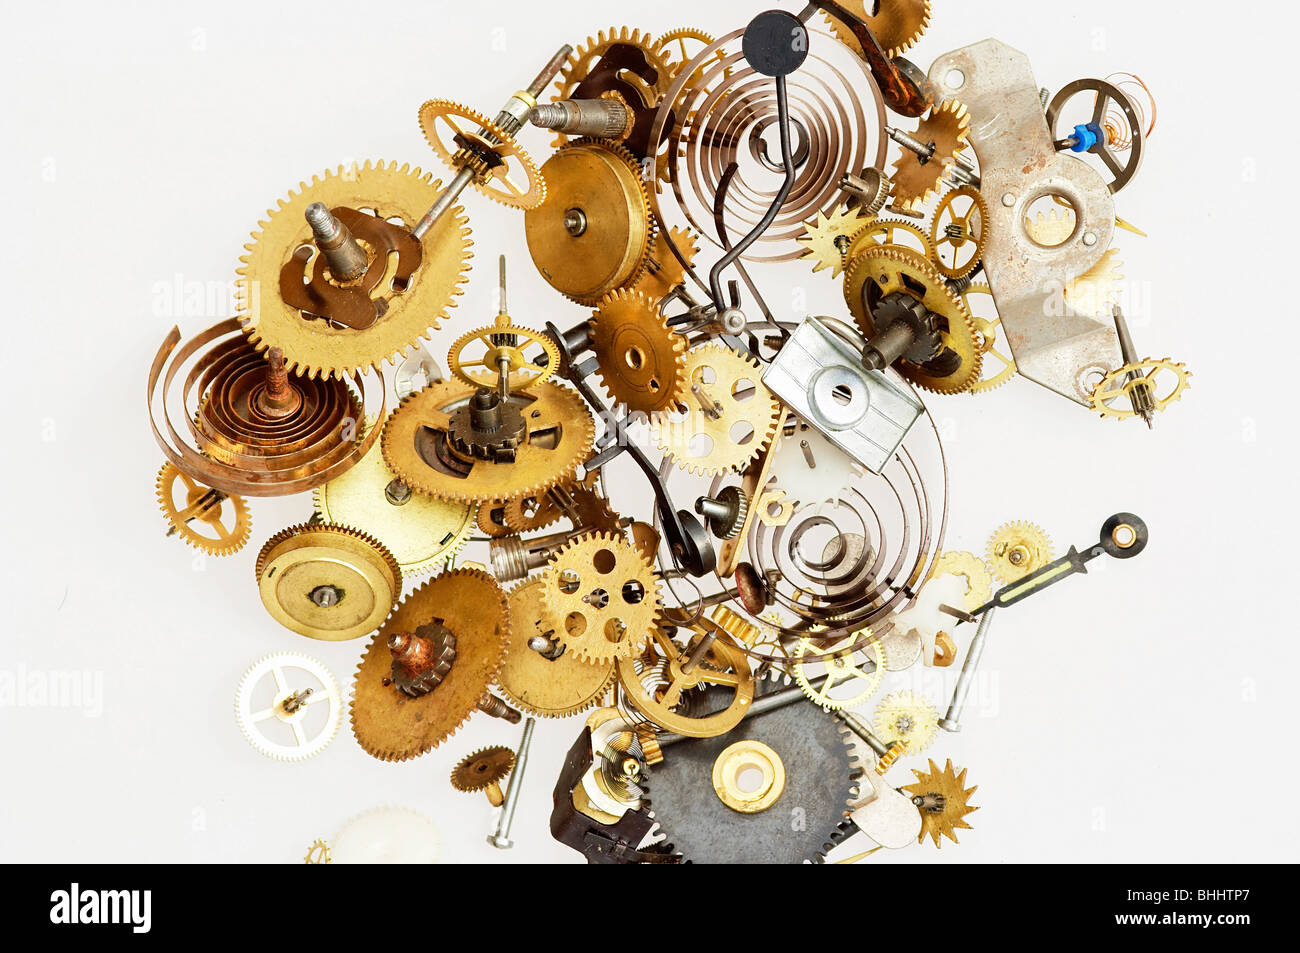 Detail (close-up) of the parts of clockwork mechanism Stock Photo